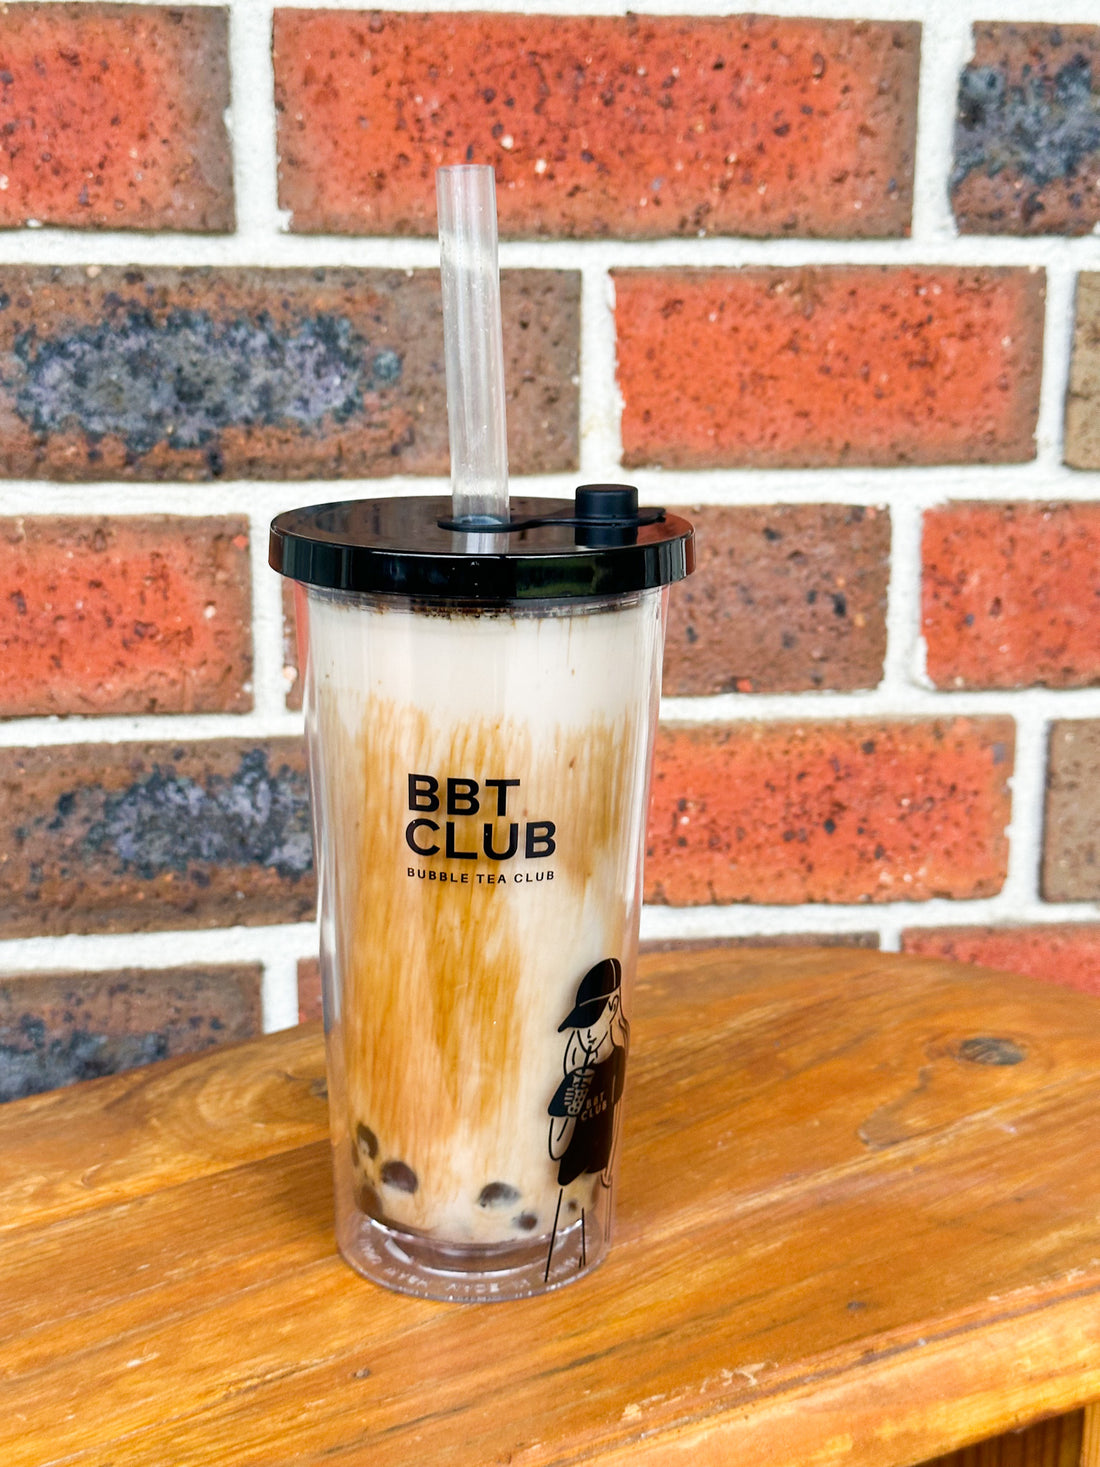 Who are the biggest bubble tea stores?